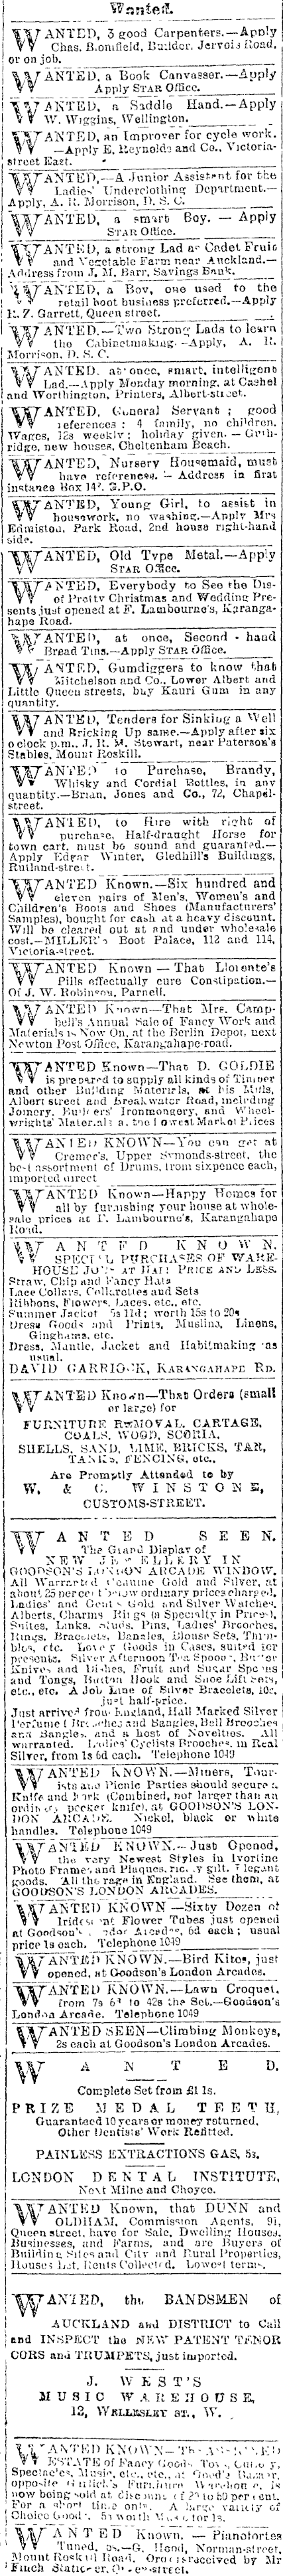 Papers Past Newspapers Auckland Star 5 December 1896 Page 1 Advertisements Column 7